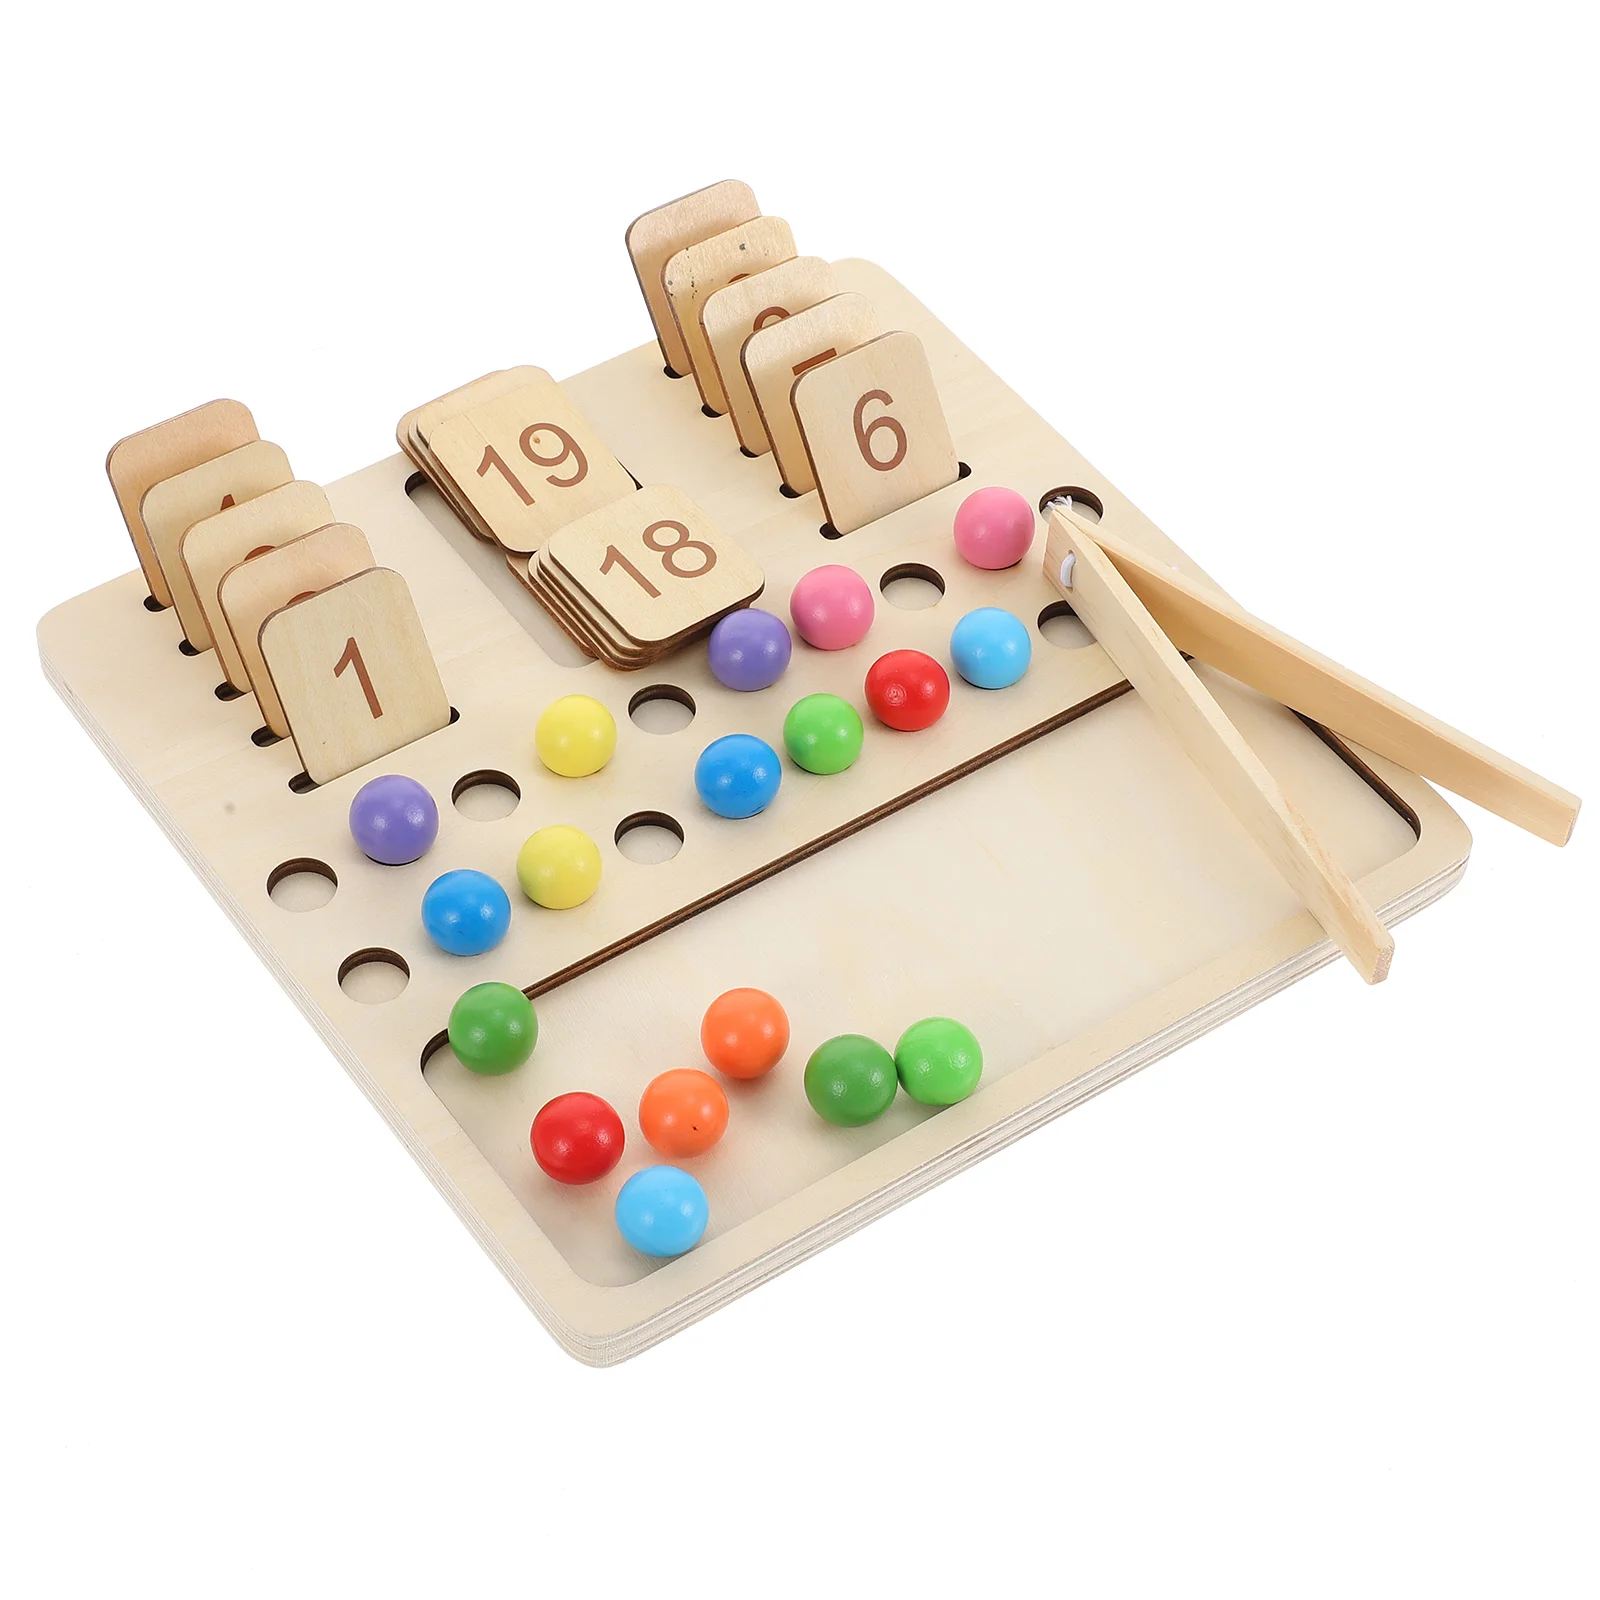 Digital Cognitive Board Toys Wooden Educational Teaching Supplies Playthings Aids Arithmetic Boards Math Learning montessori educational wooden toys for kids children toddlers toys 9x9 multiplication table math arithmetic teaching aids